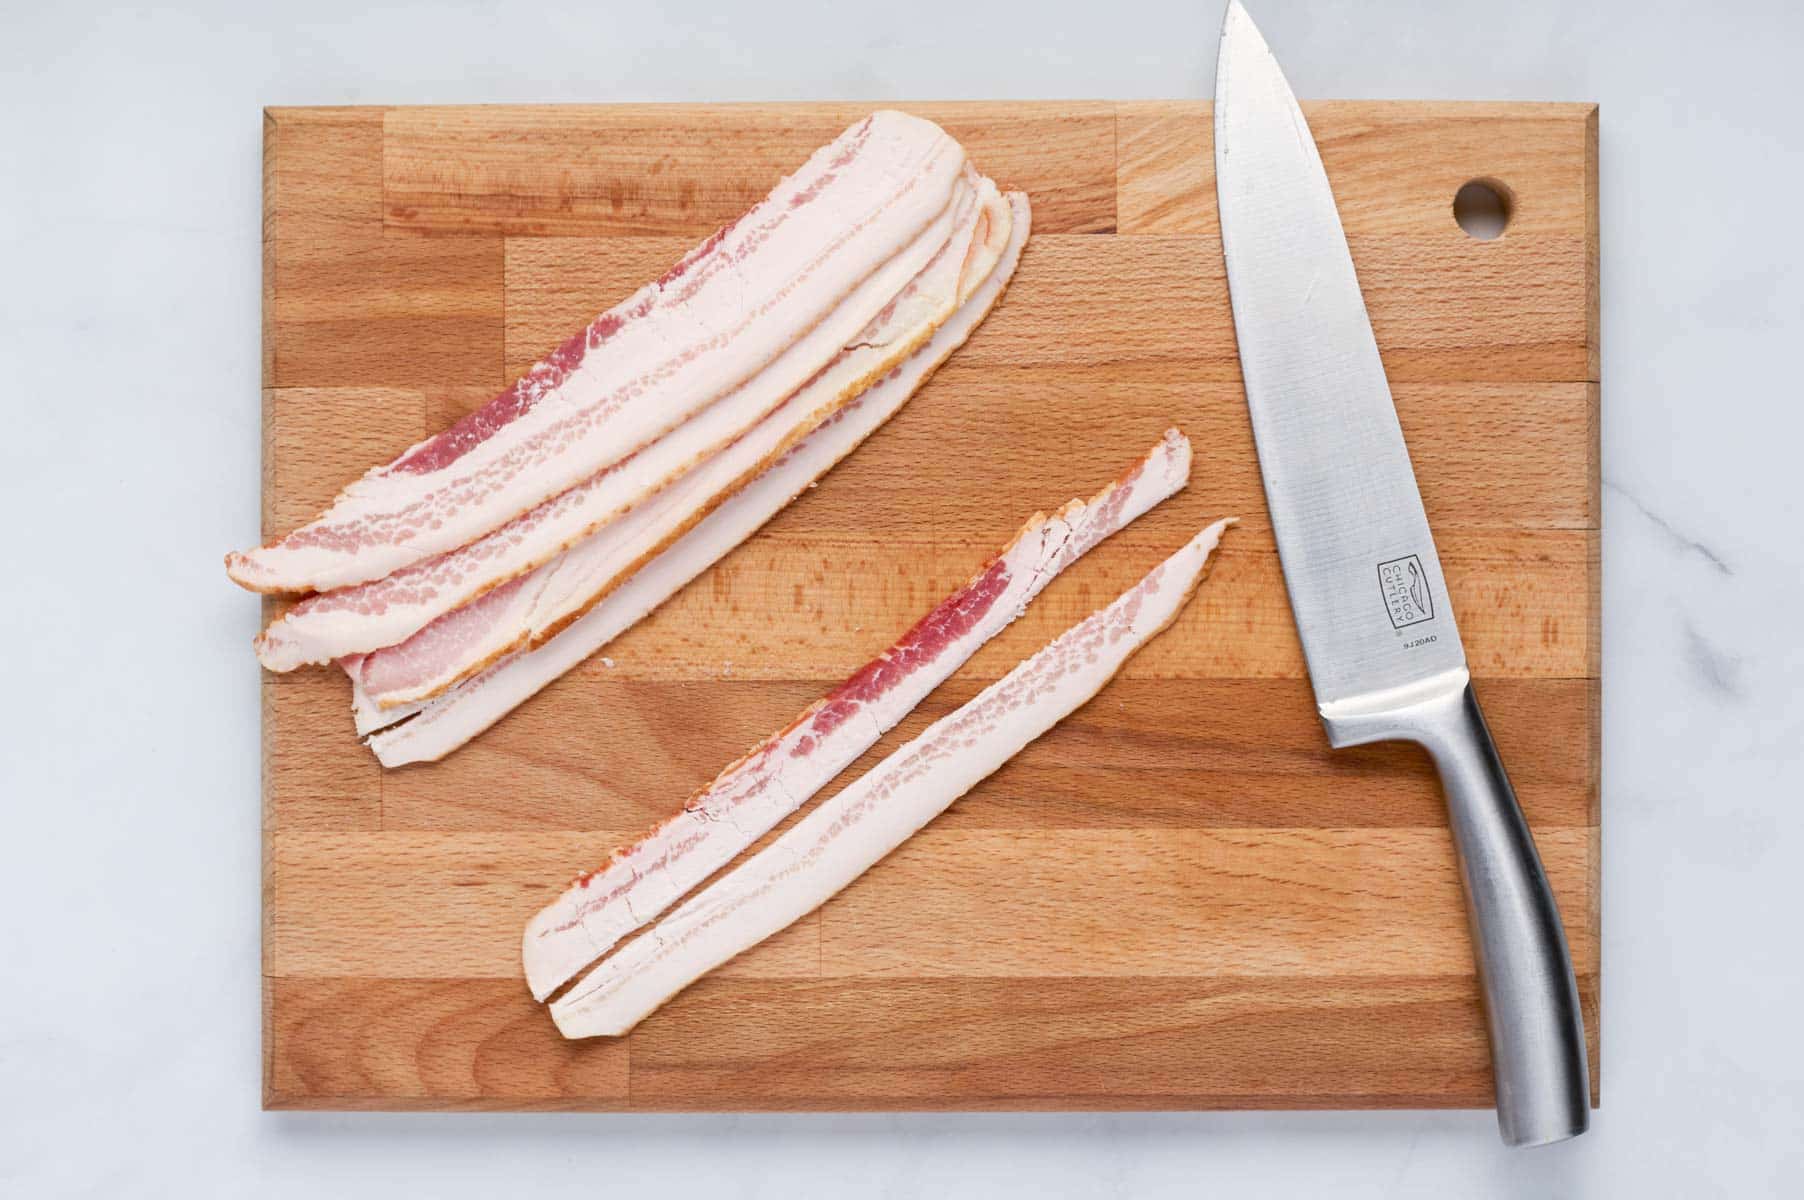 Bacon slices are on a cutting board with a knife.